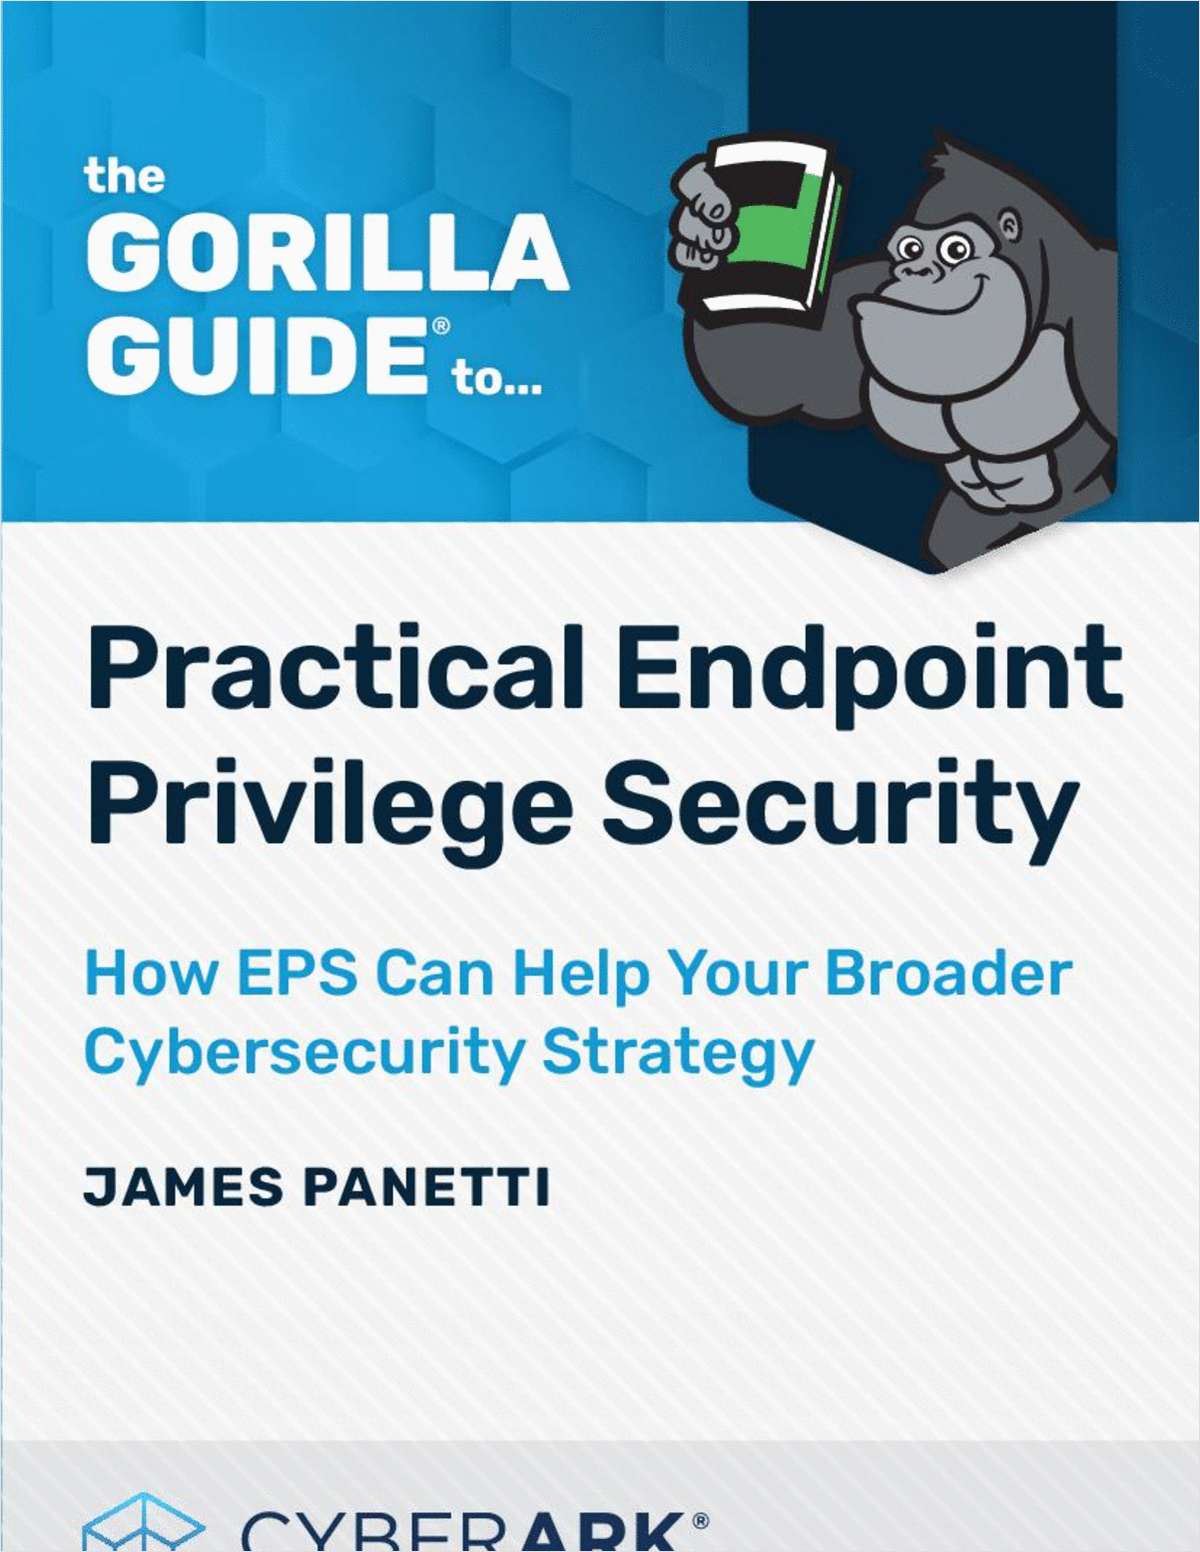 The Gorilla Guide to Practical Endpoint Privilege Security